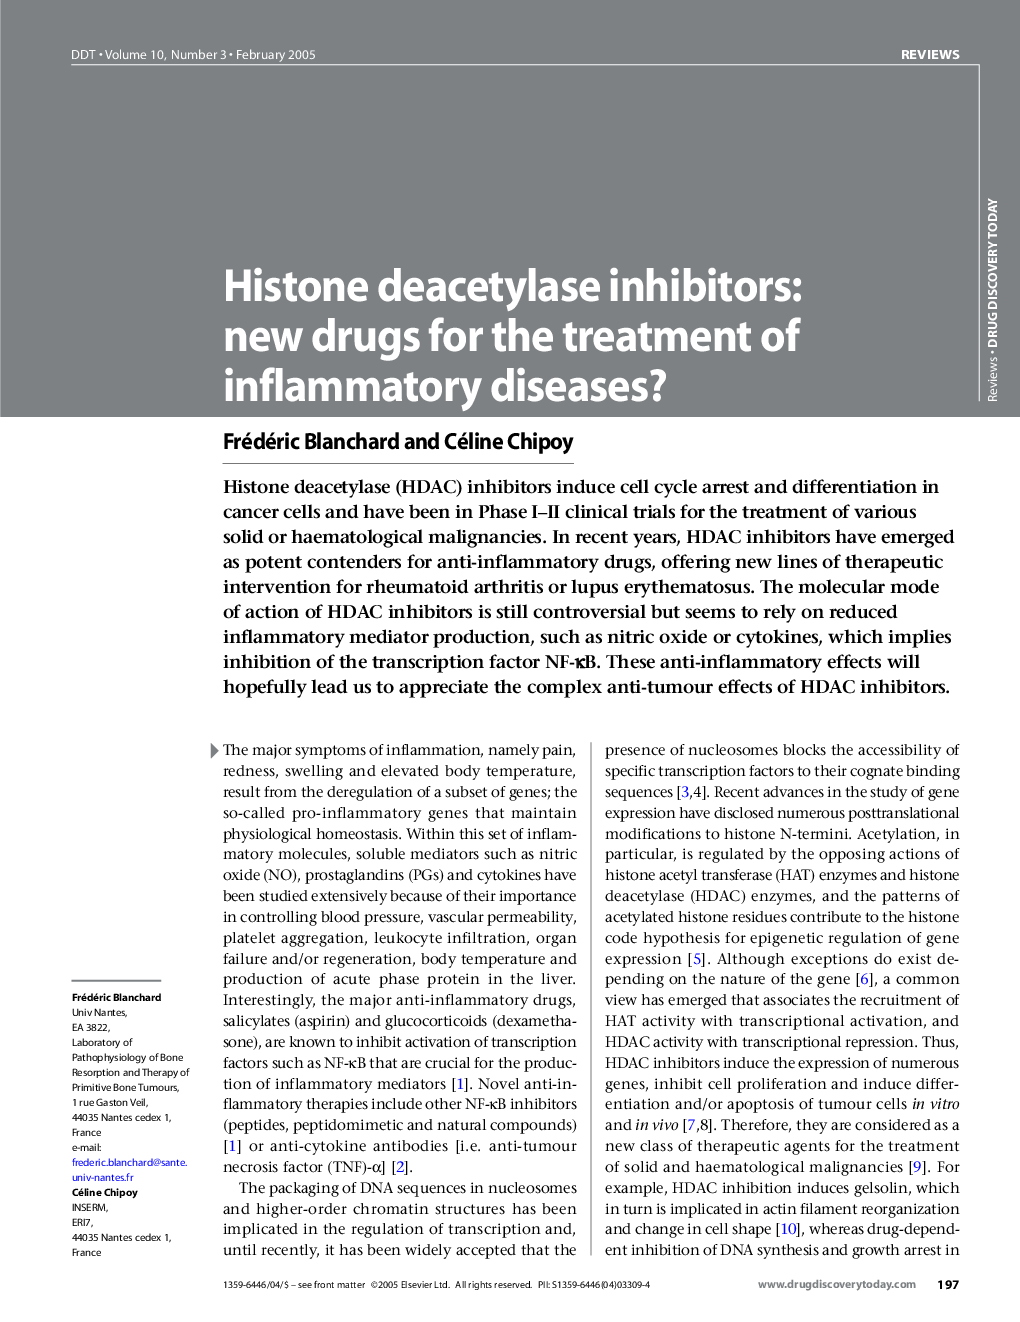 Histone deacetylase inhibitors: new drugs for the treatment of inflammatory diseases?